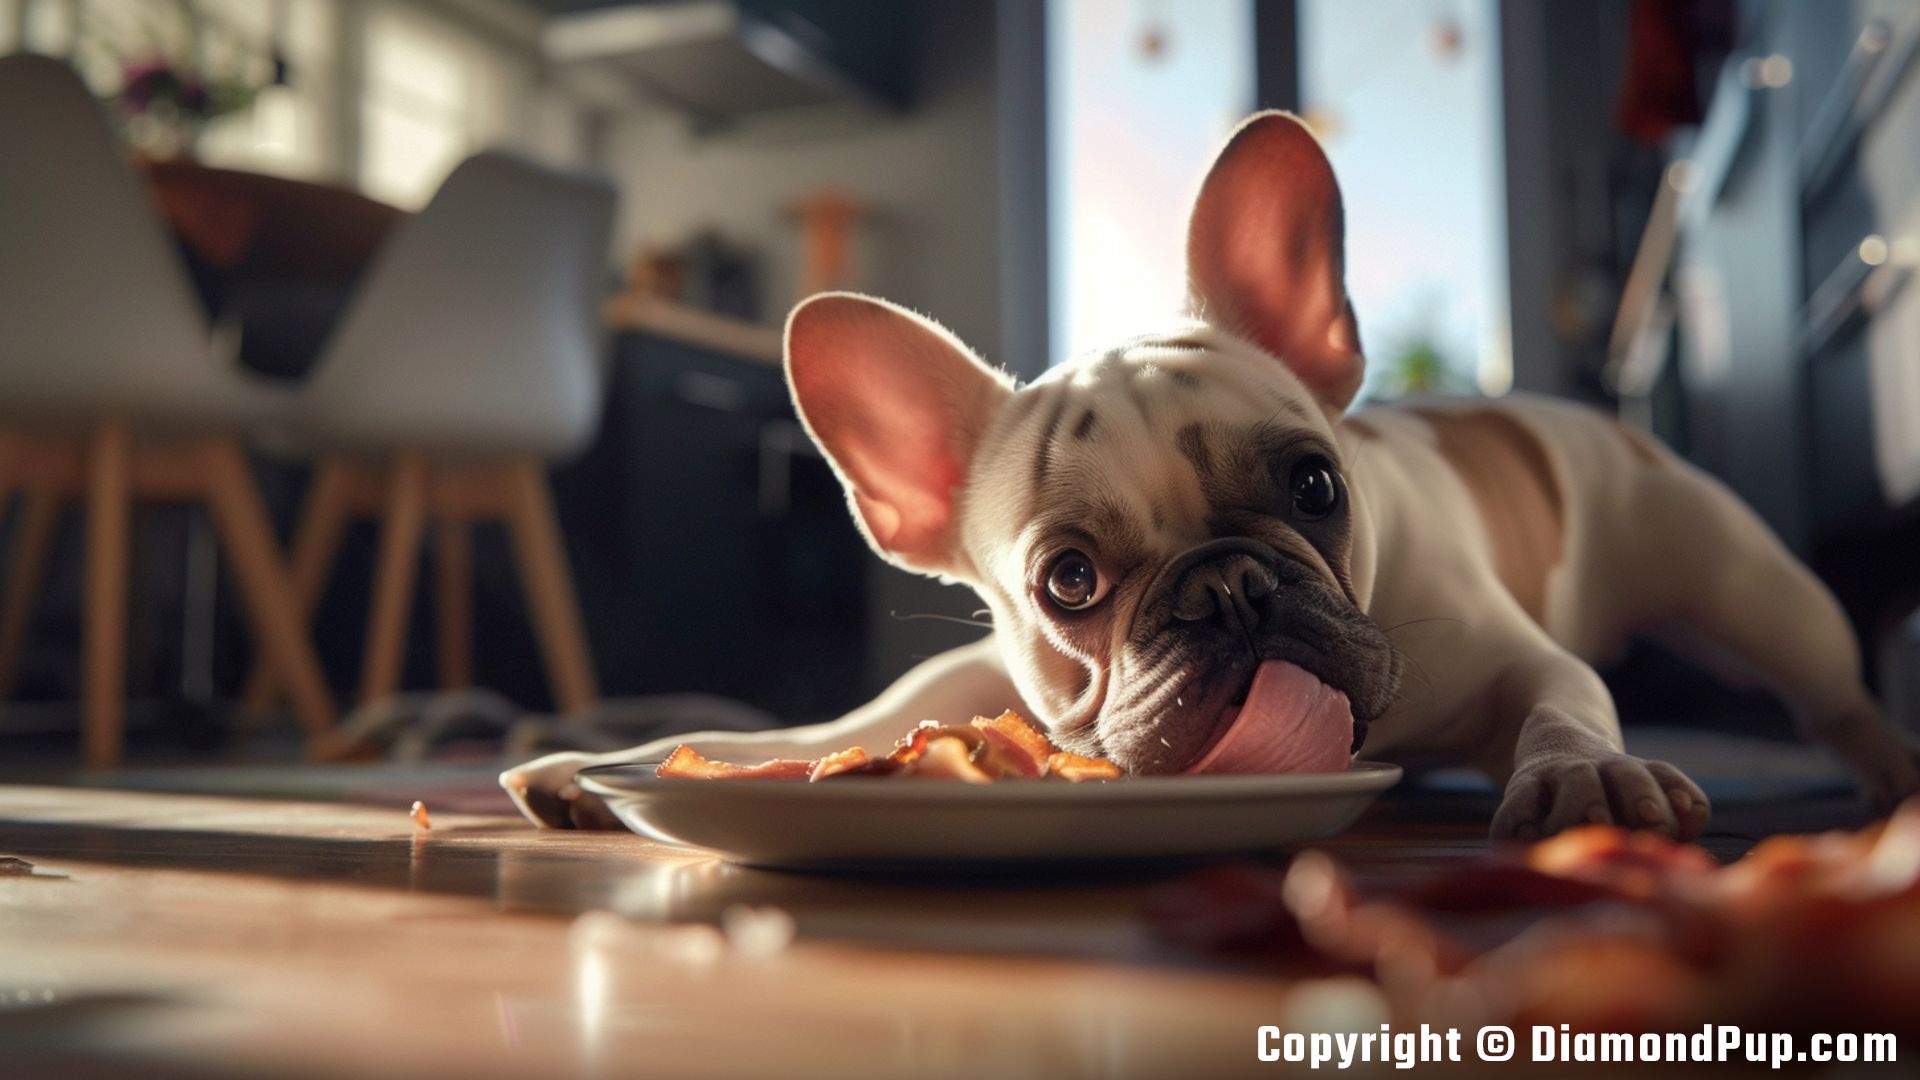 Photo of a Cute French Bulldog Snacking on Bacon